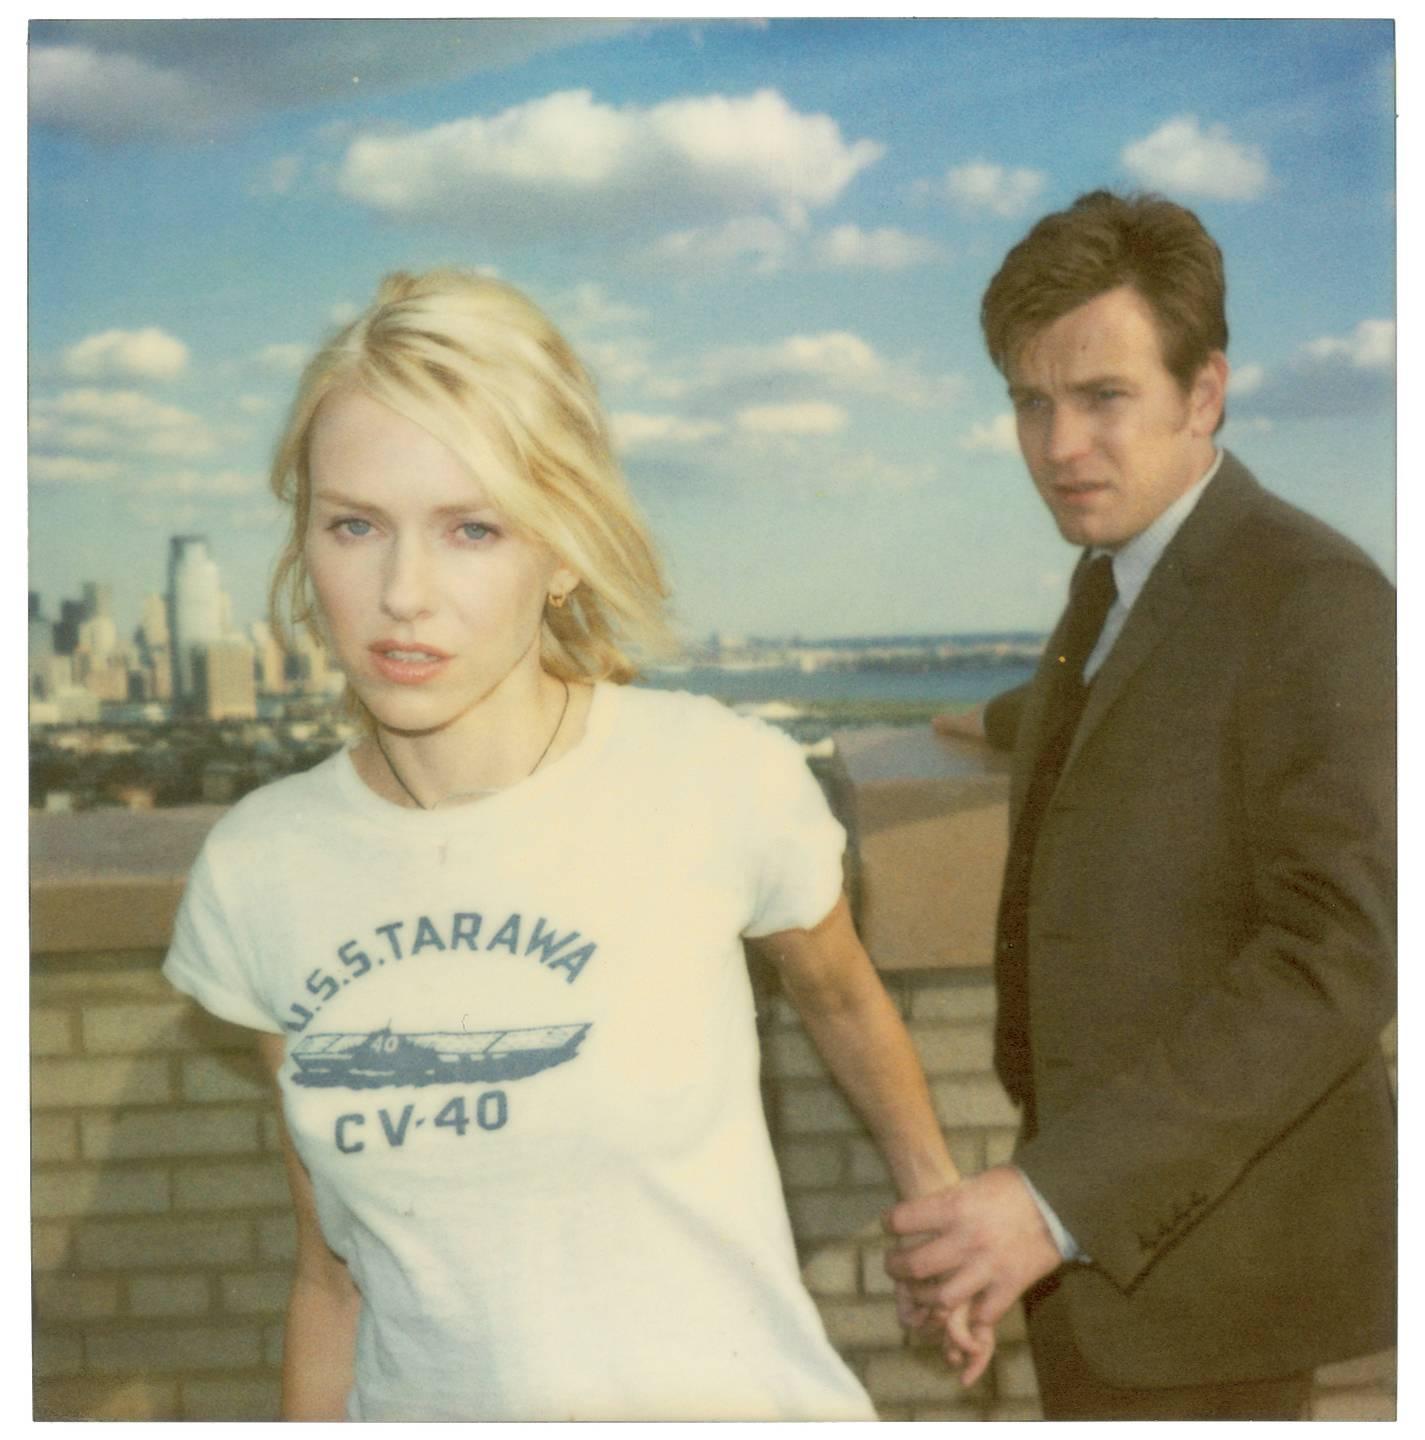 Lila and Sam - Stay - featuring Naomi Watts and Ewan McGregor - Photograph by Stefanie Schneider